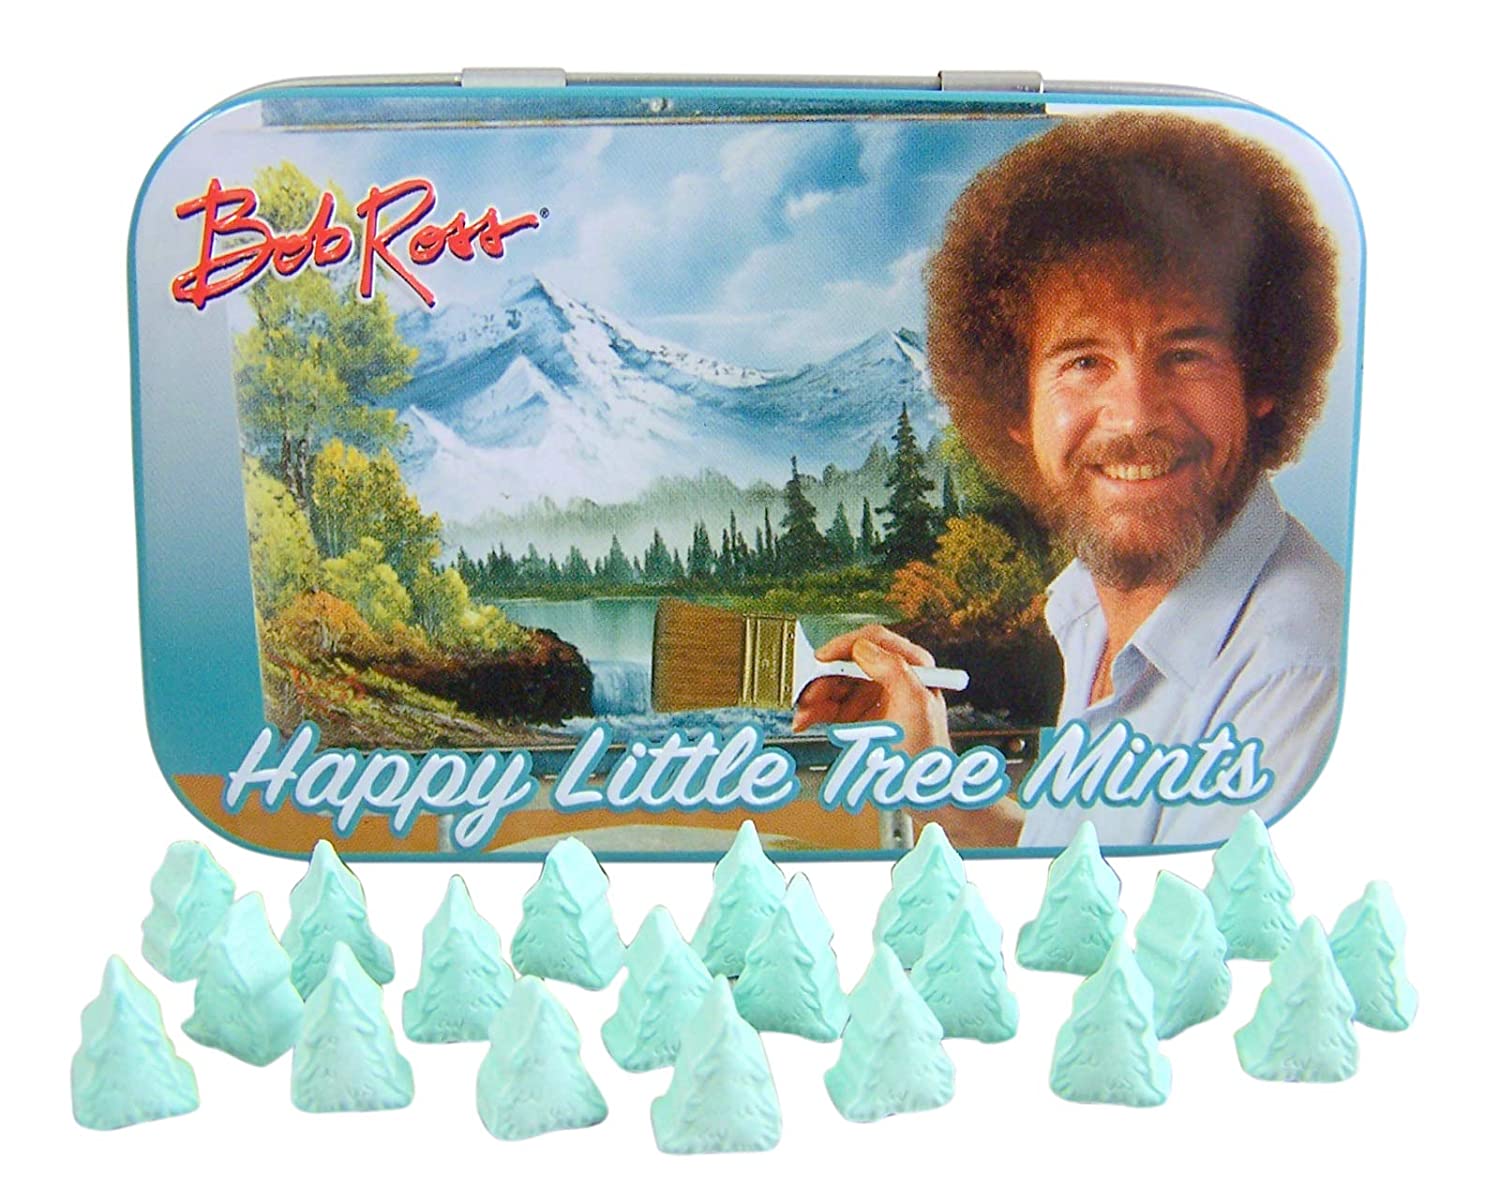 Bob Ross Happy Little Tree Mints Candy candies imported goods snacks snack imports treats gifts gift sets gag gifts fun funny exclusive limited special edition unique flavours import retro nostalgic old fashioned childhood candy shipped to Canada America world-wide international shipping online candy store mint novelty gift artist art lovers fun  christmas stocking stuffer holiday edition